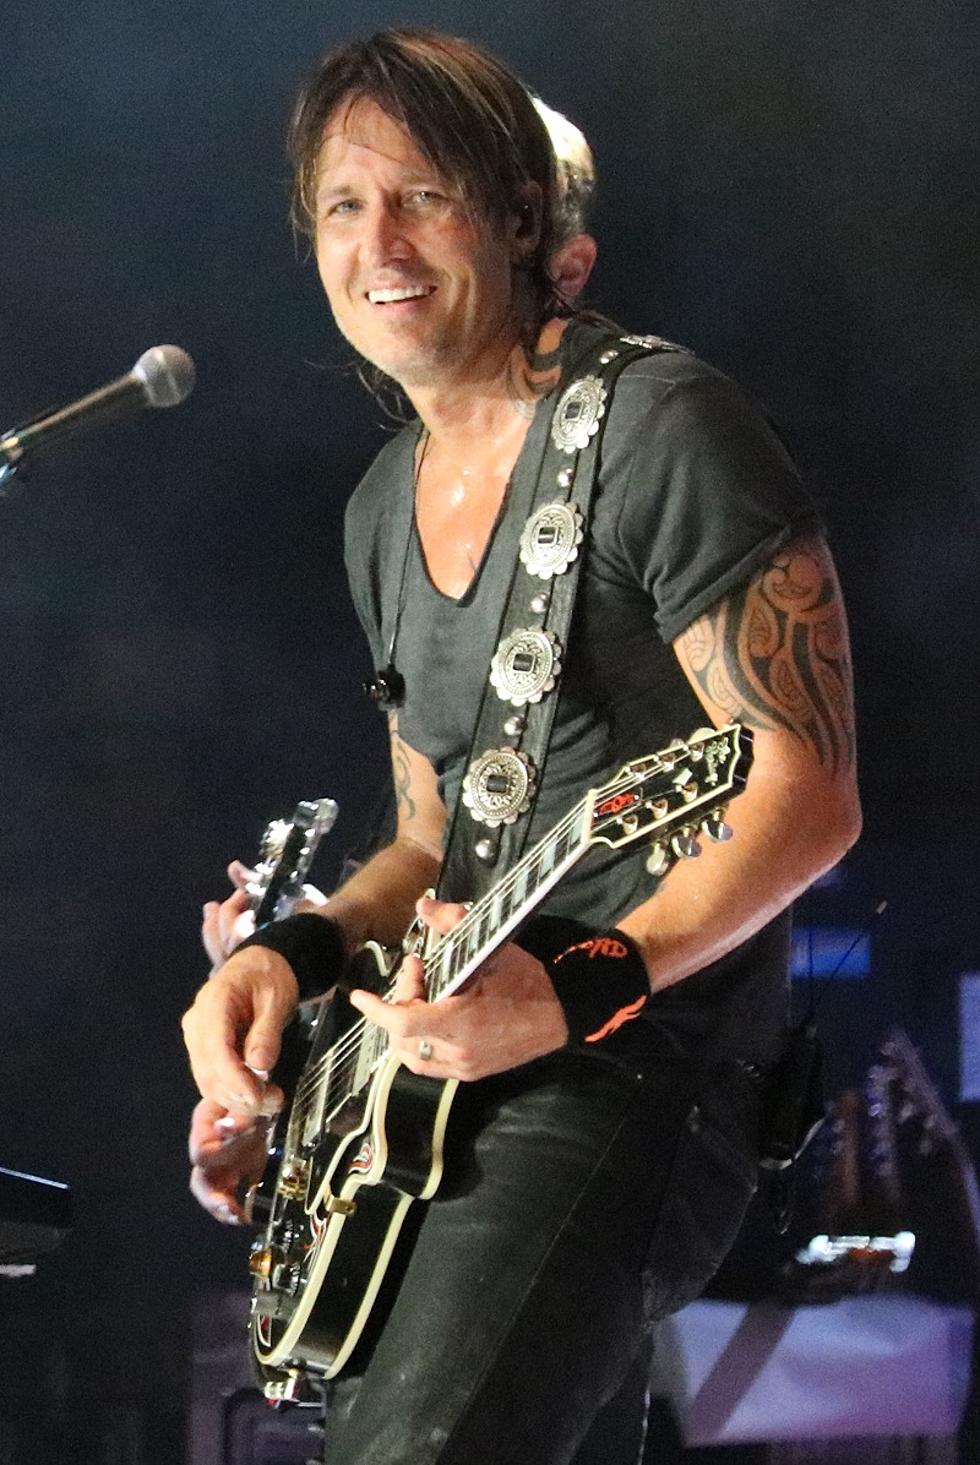 Keith Urban and Big &#038; Rich Posted Videos About the GJCF [VIDEOS]